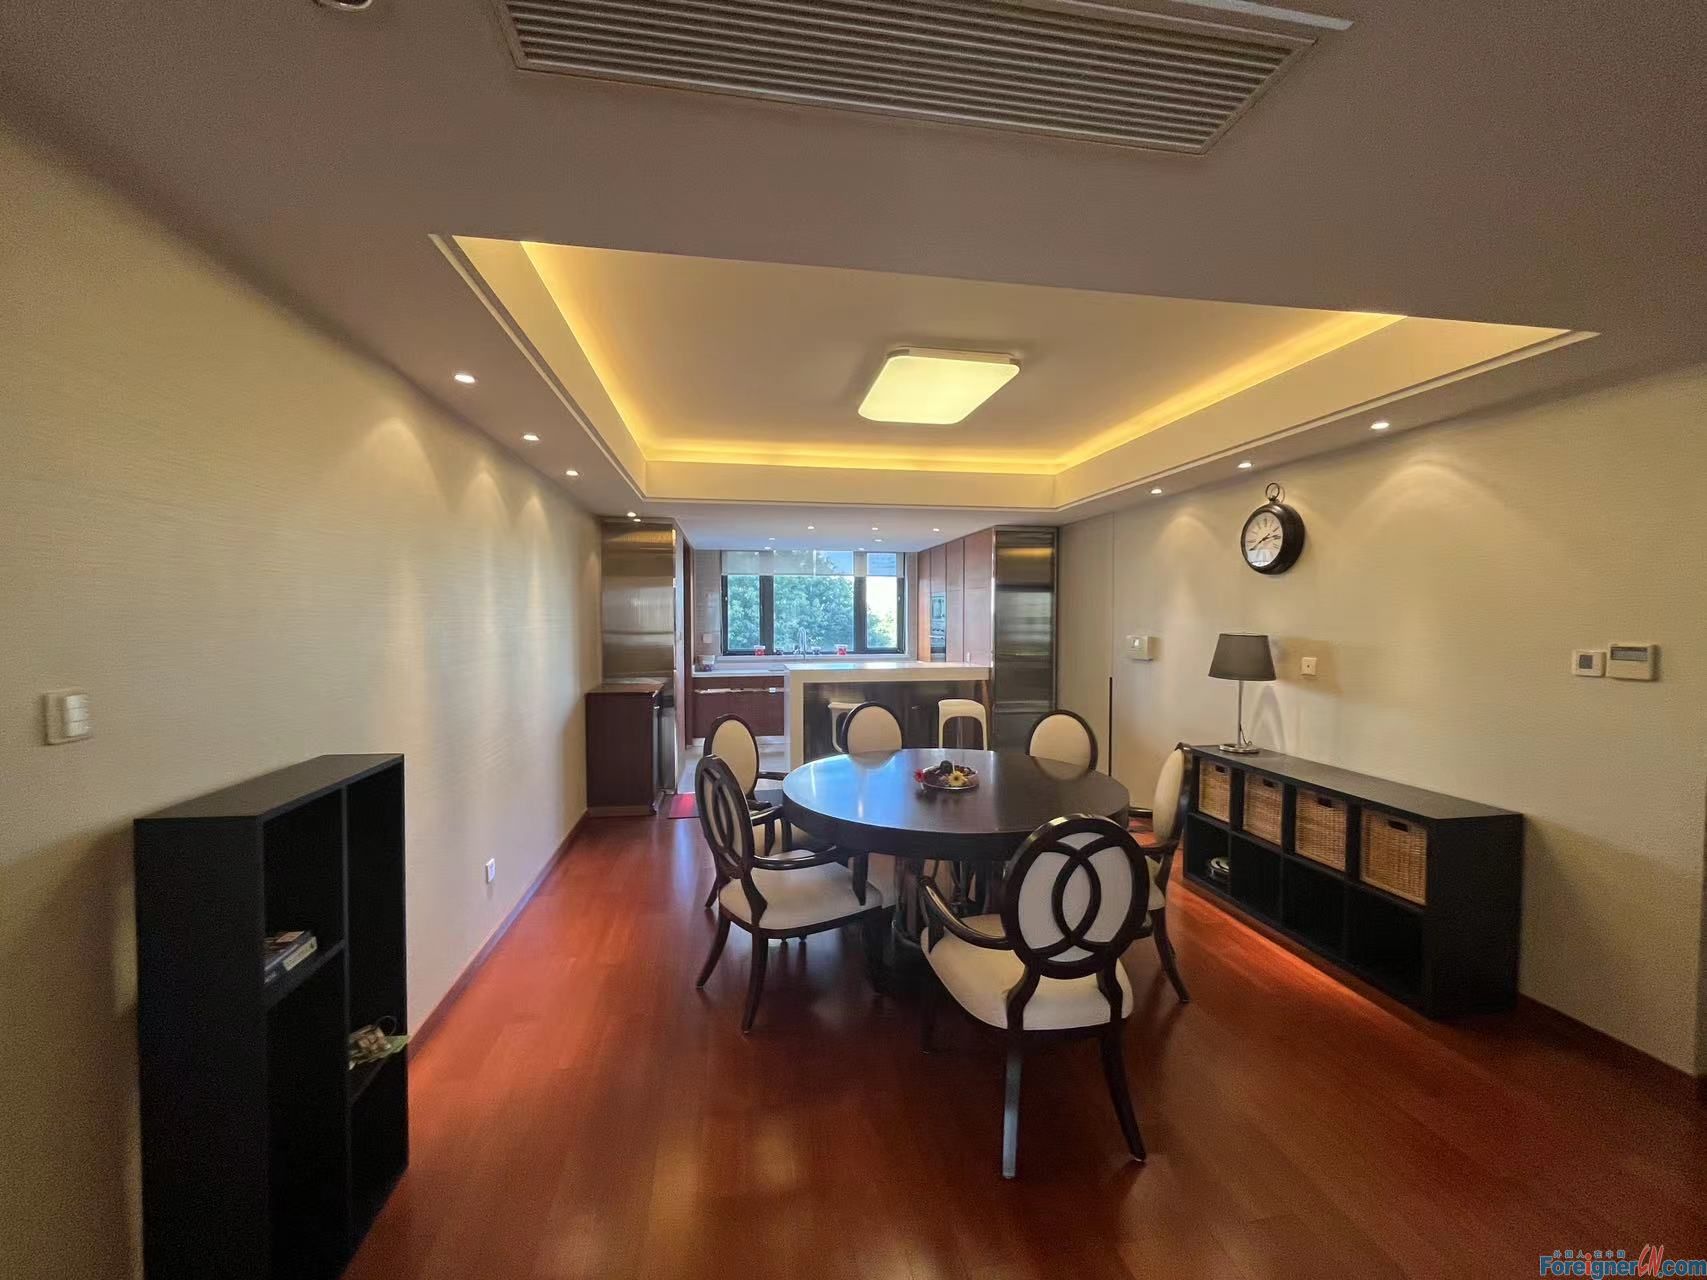 Fantastic!! Jinghope 4 bedrooms Apartment to rent in SIP /Suzhou/Fully furnished-Central AC and Floor heating/Nearby Jinji Lake 